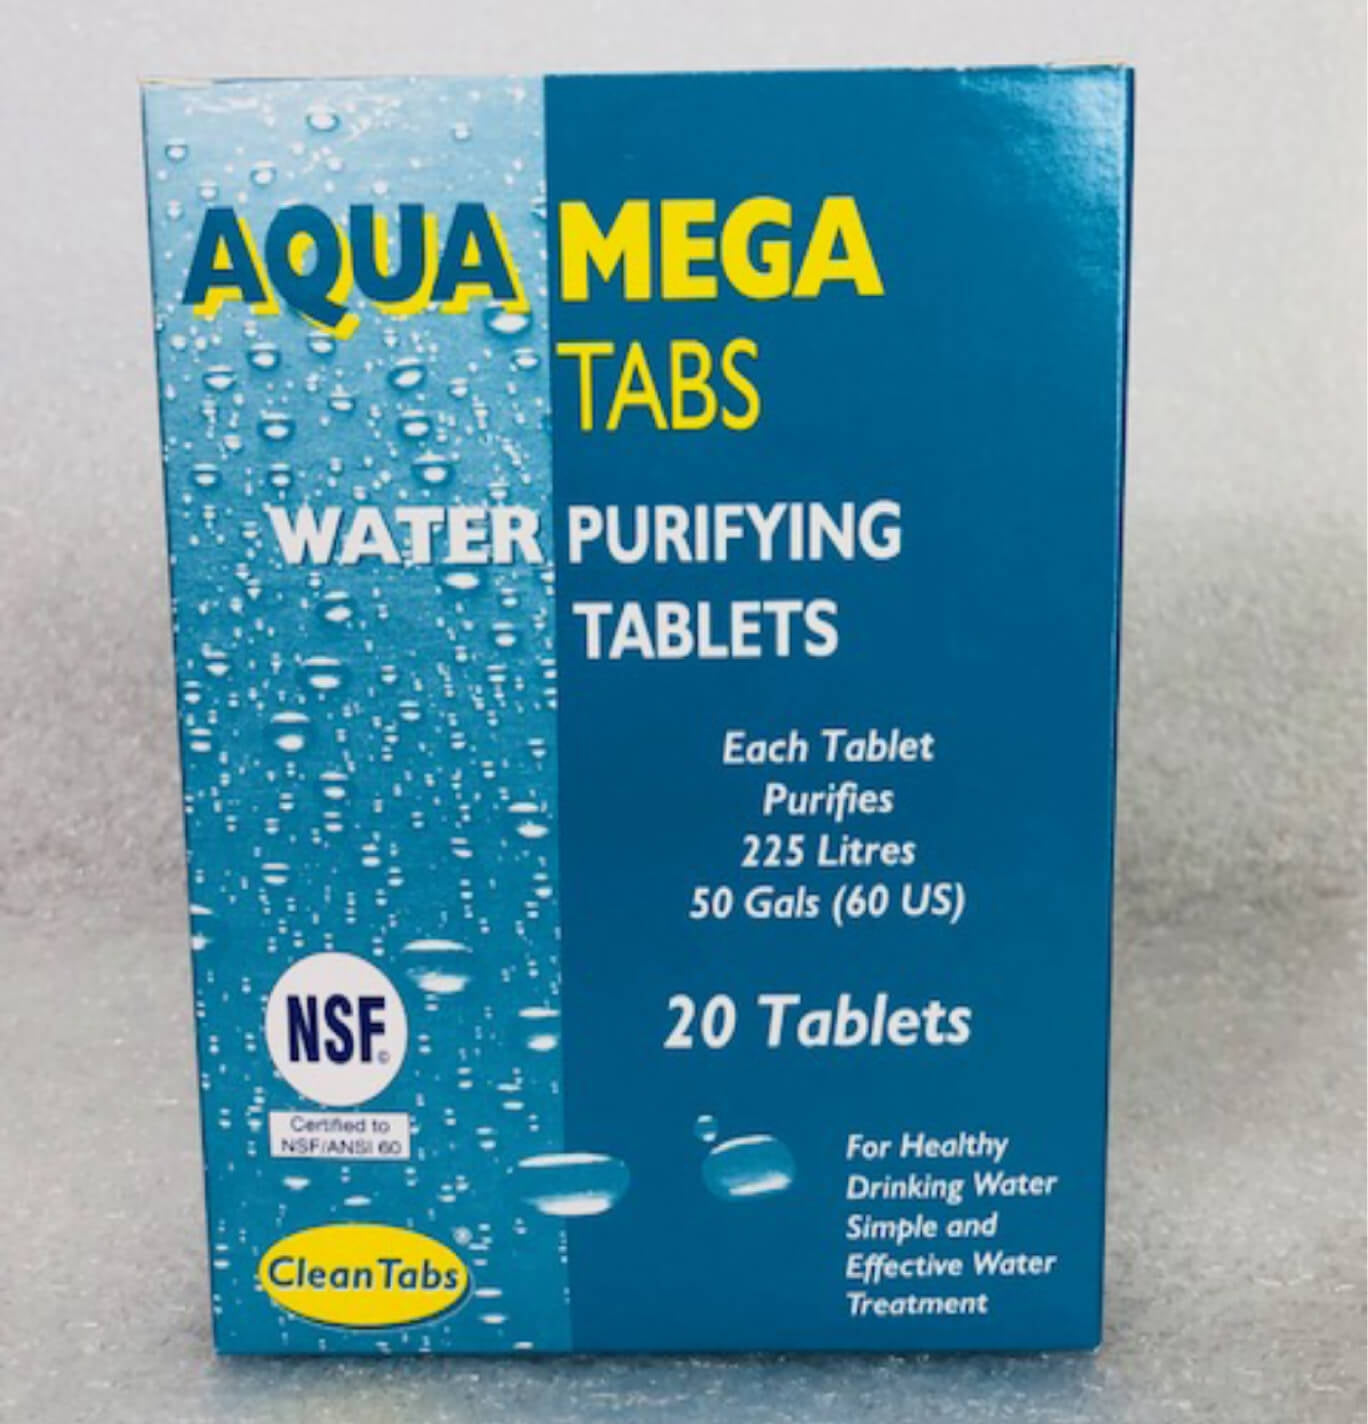 Clean Tabs Aqua Mega Water Purifying Tablets | Pack of 20 Image